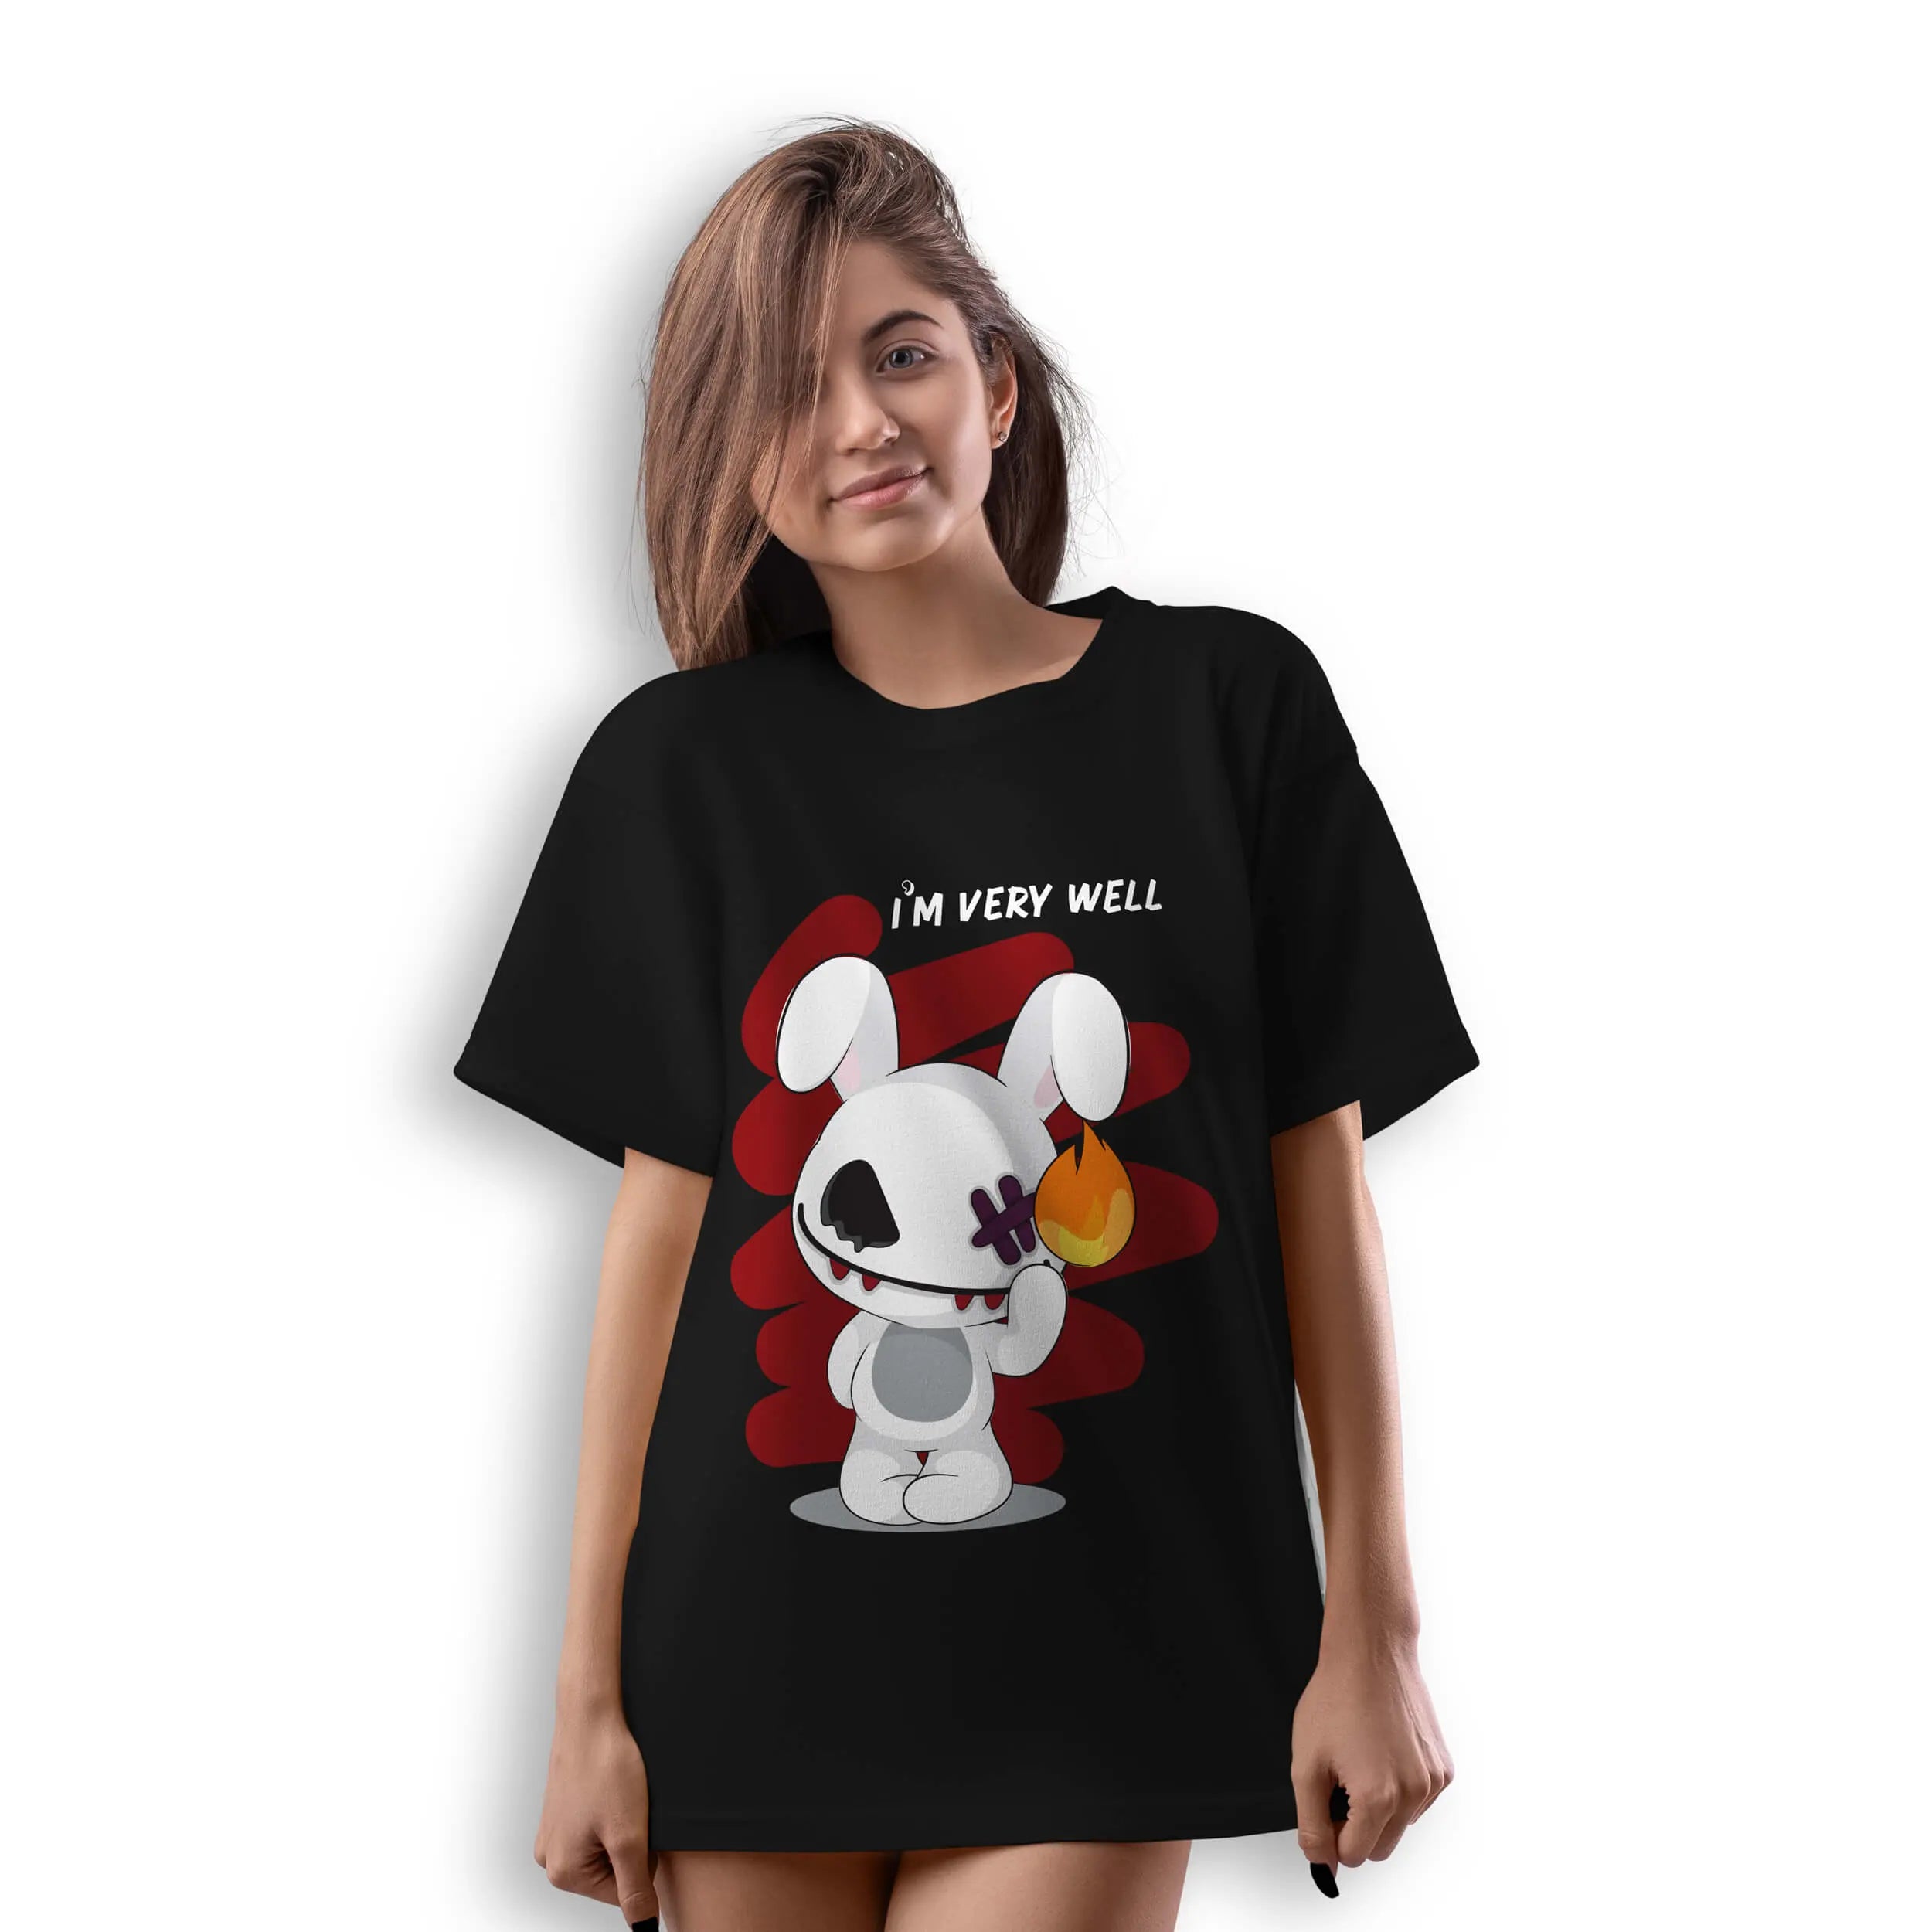 Bad Bunny Oversized T-shirt Online In India | Unisex Baggy Tees